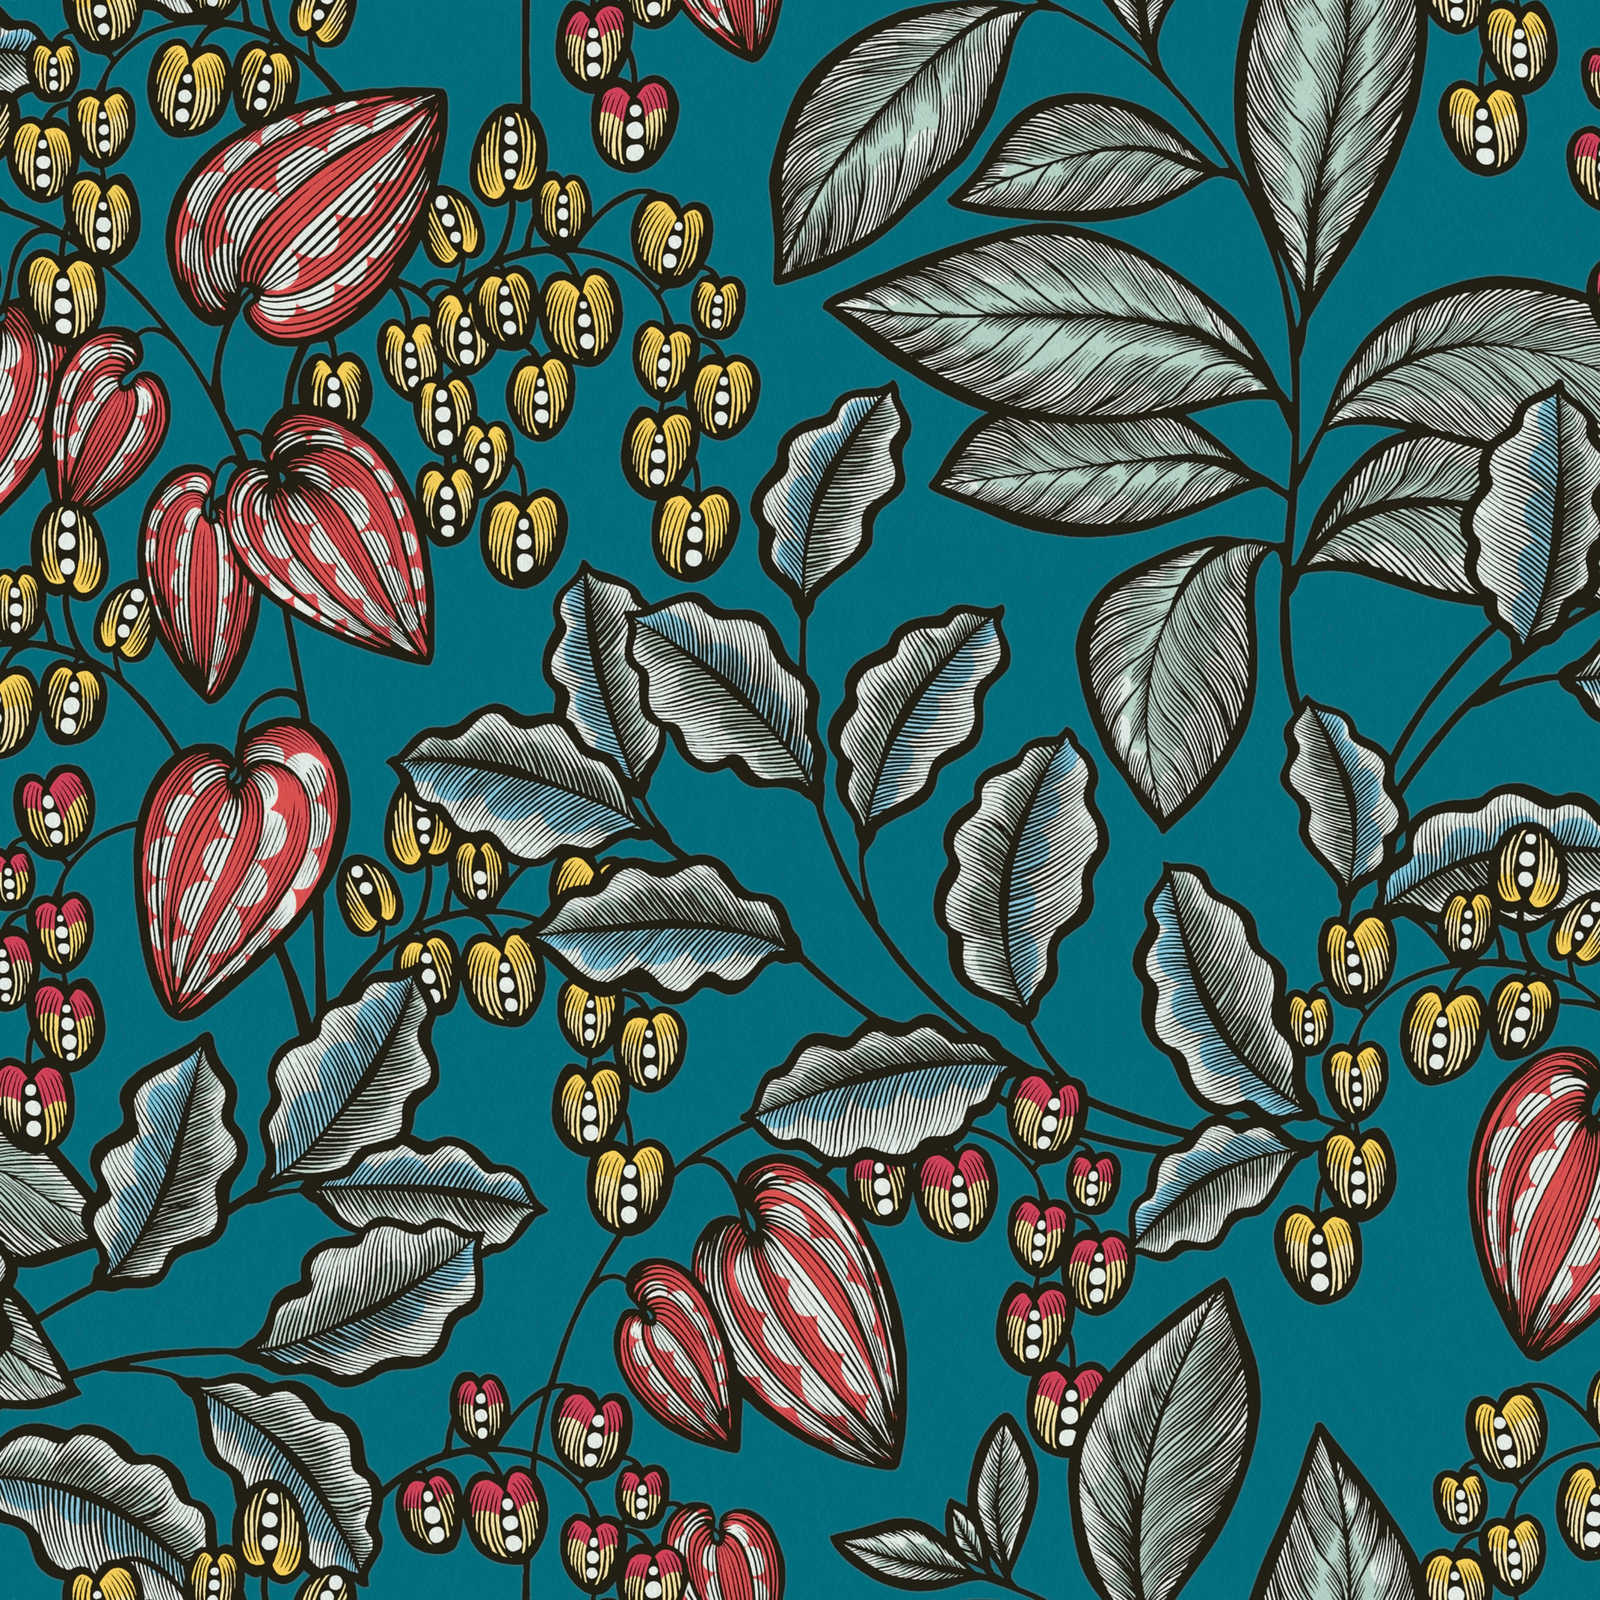 Floral wallpaper leaves & flowers in modern art style - blue, yellow, red
